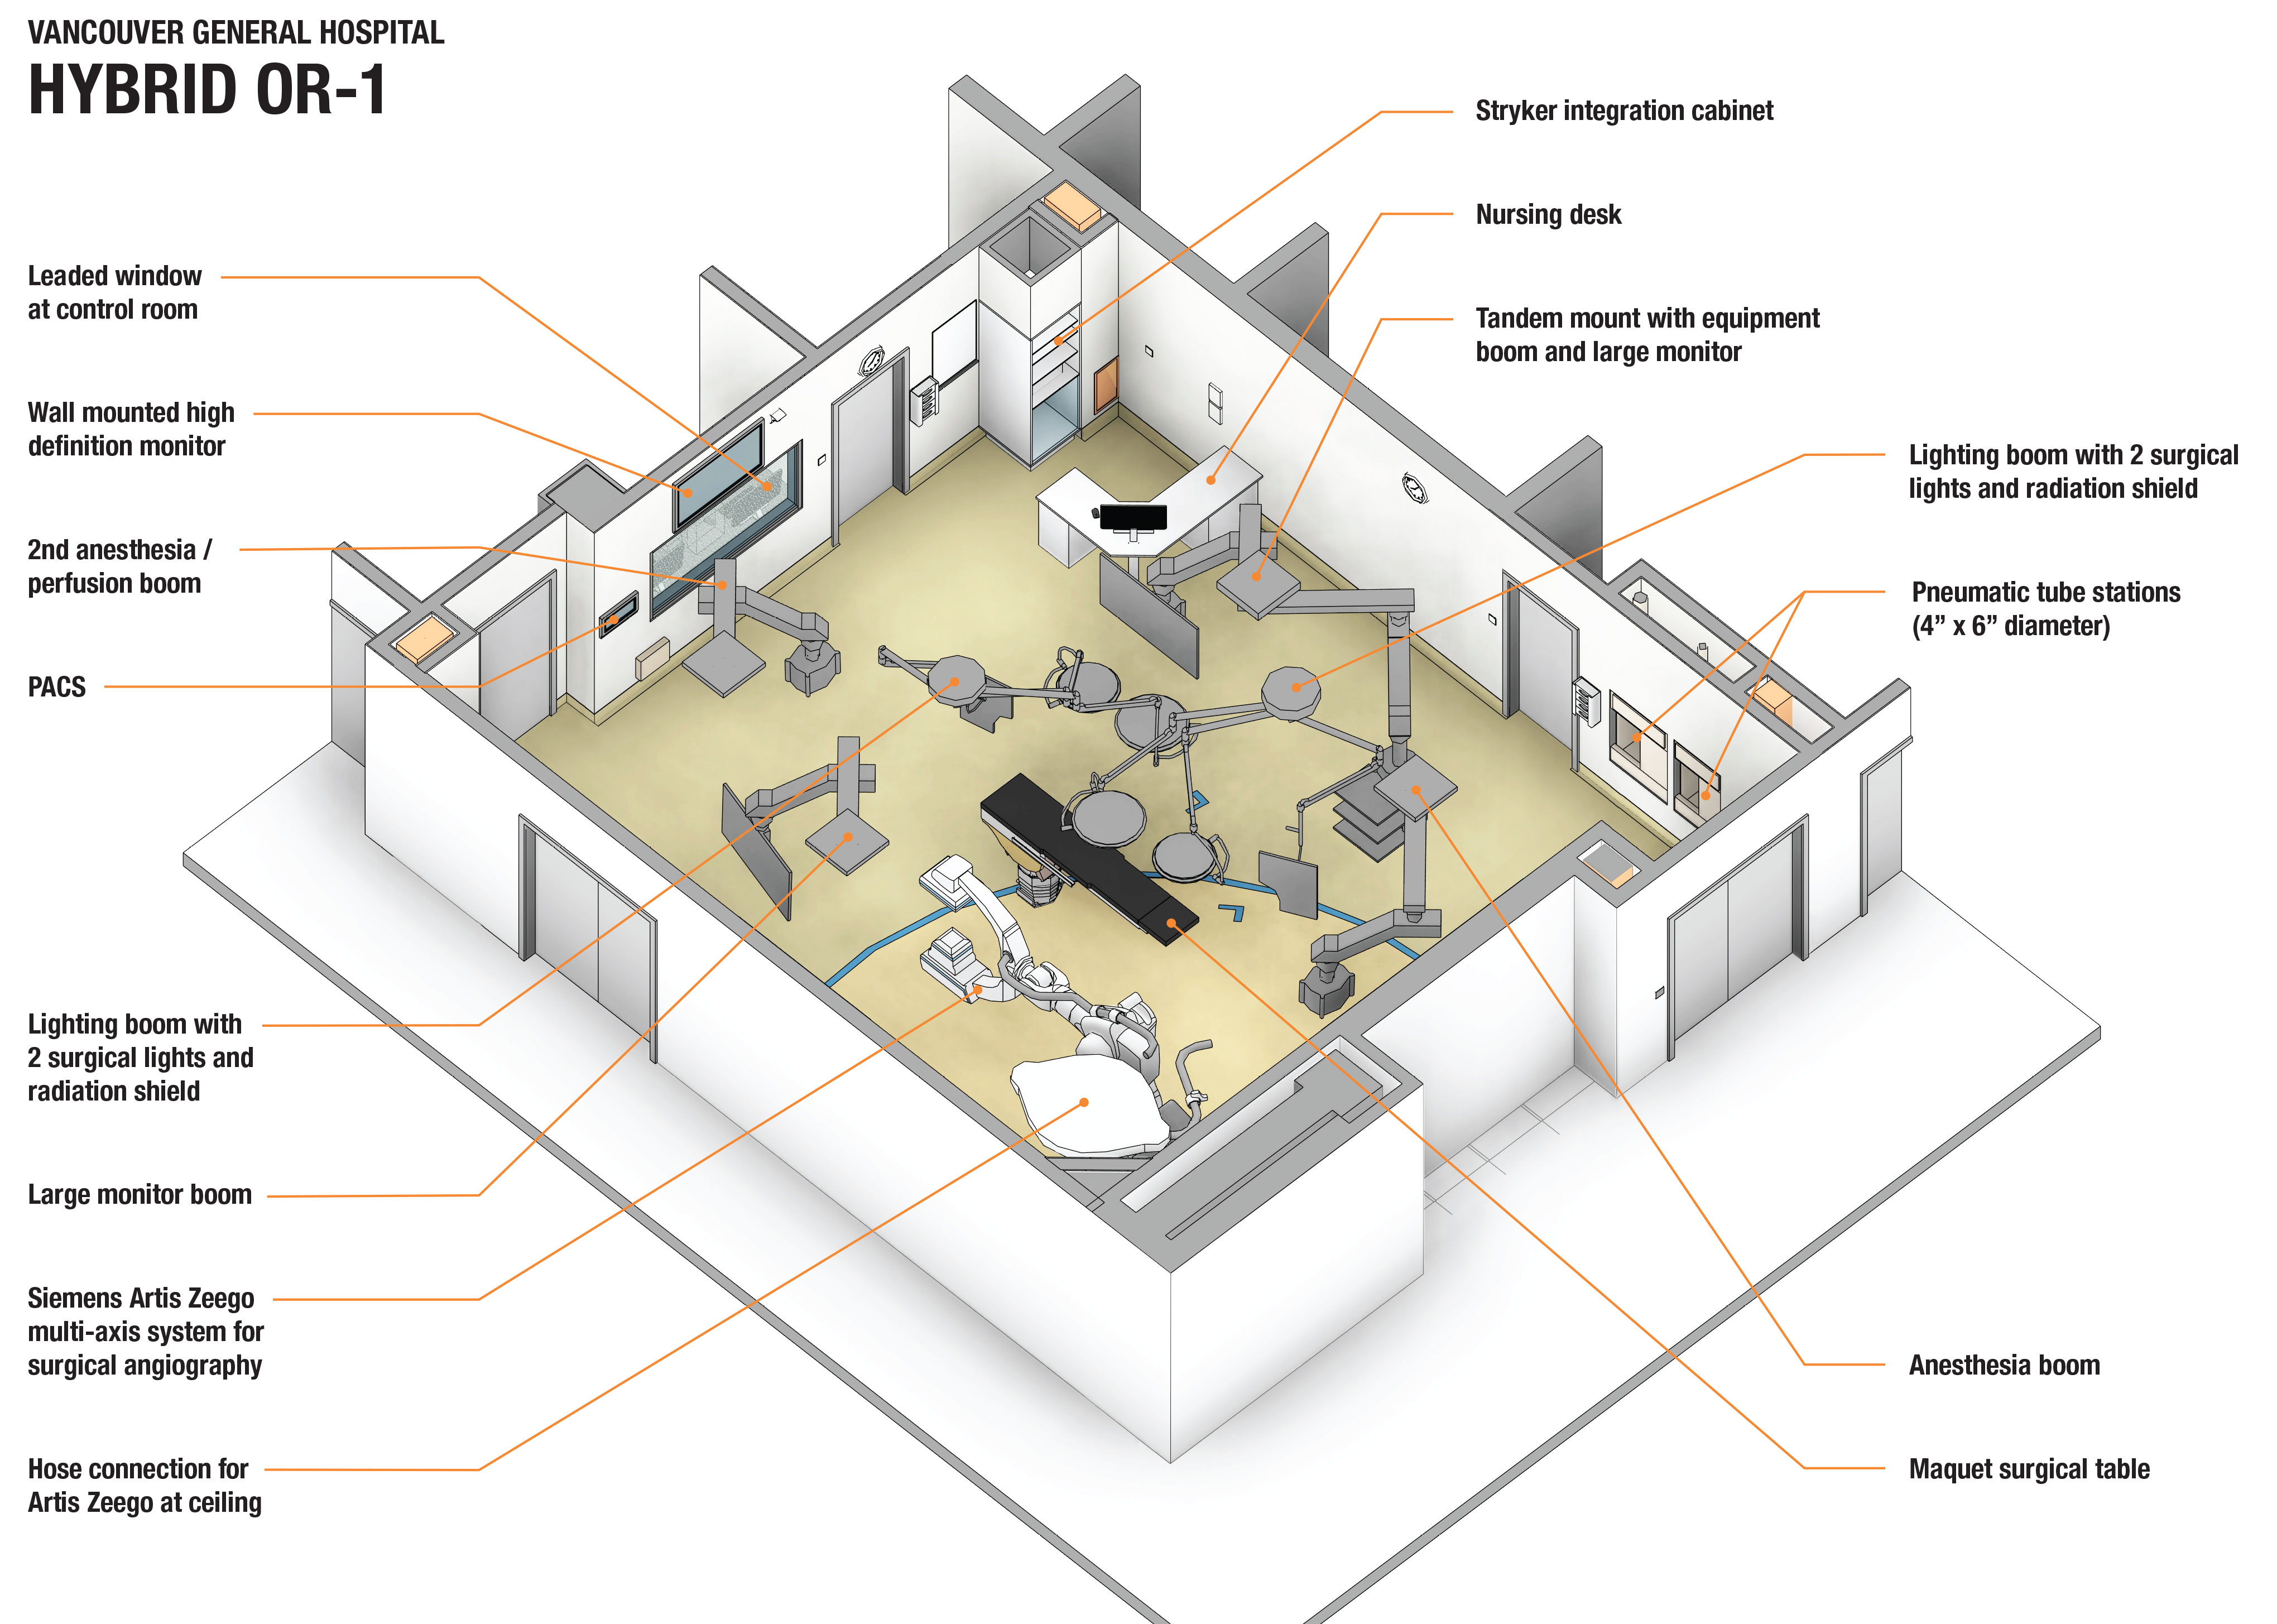 This diagram provides a bird’s eye view of our new hybrid OR under construction at VGH. 